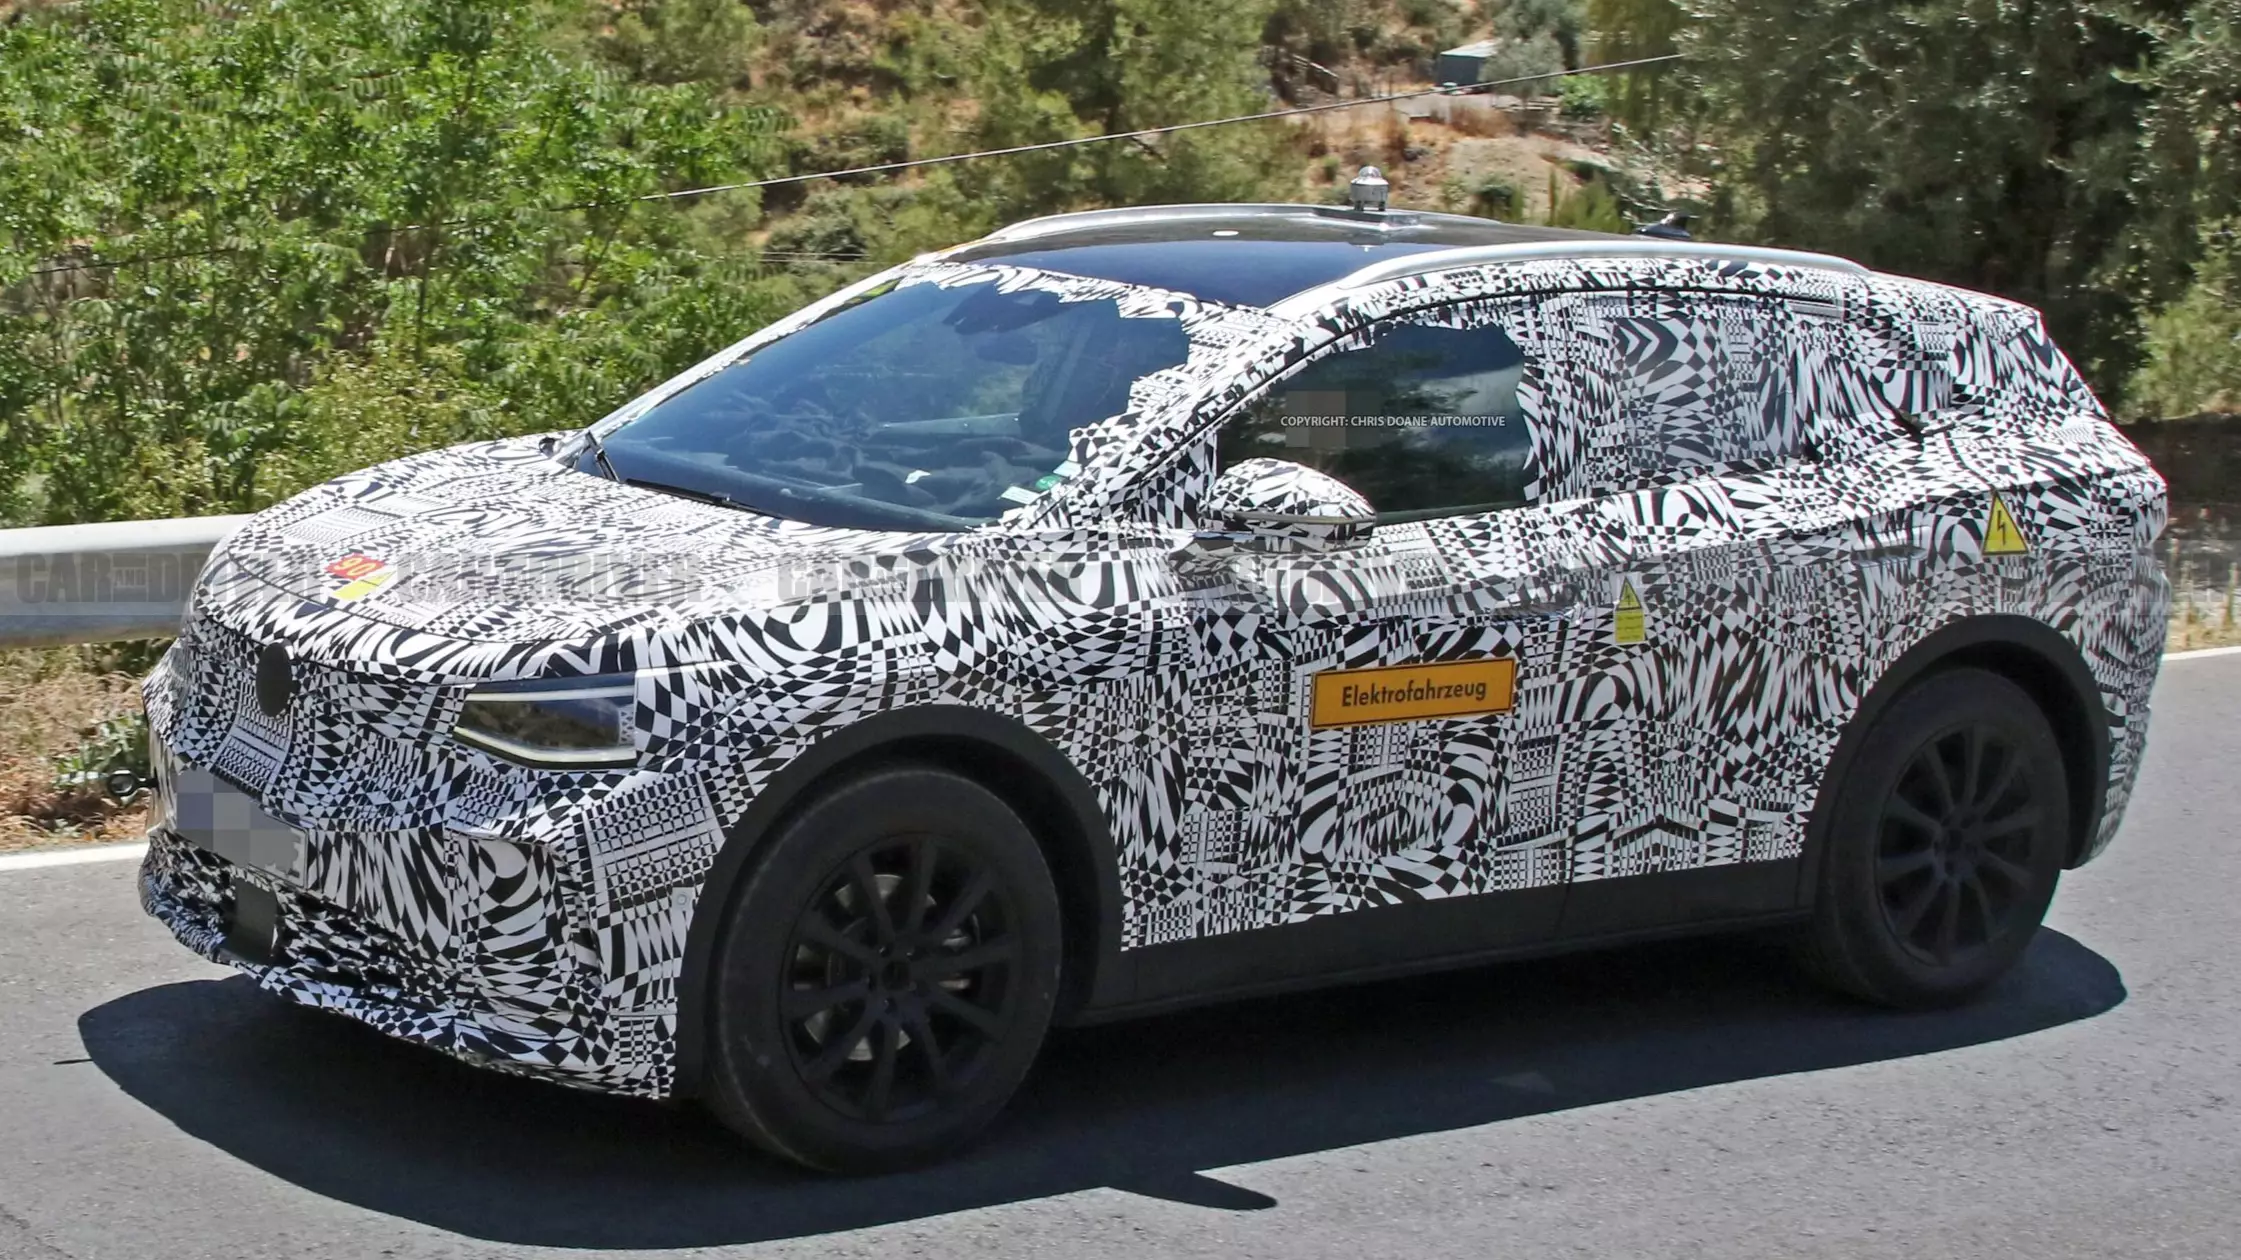 ​Volkswagen ID Crozz 2020 Electric SUV Spotted In Test Run